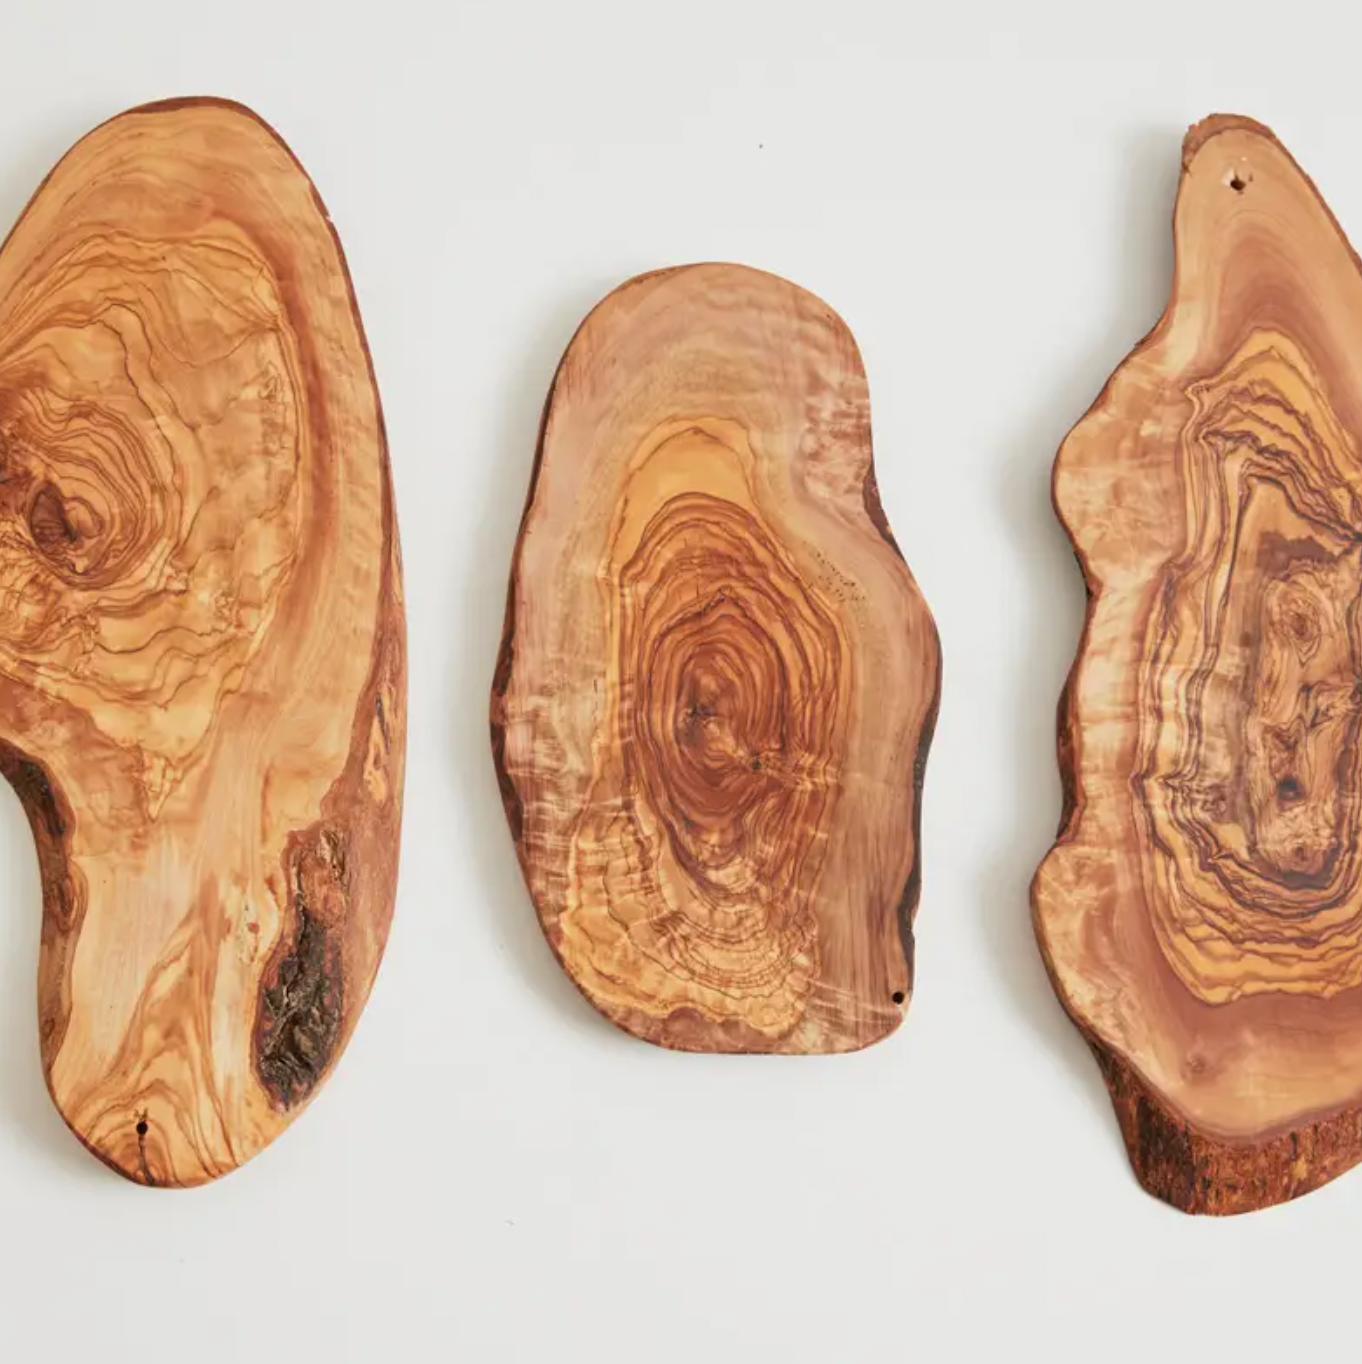 OliveWood - Italian Kitchenware made from quality olive wood